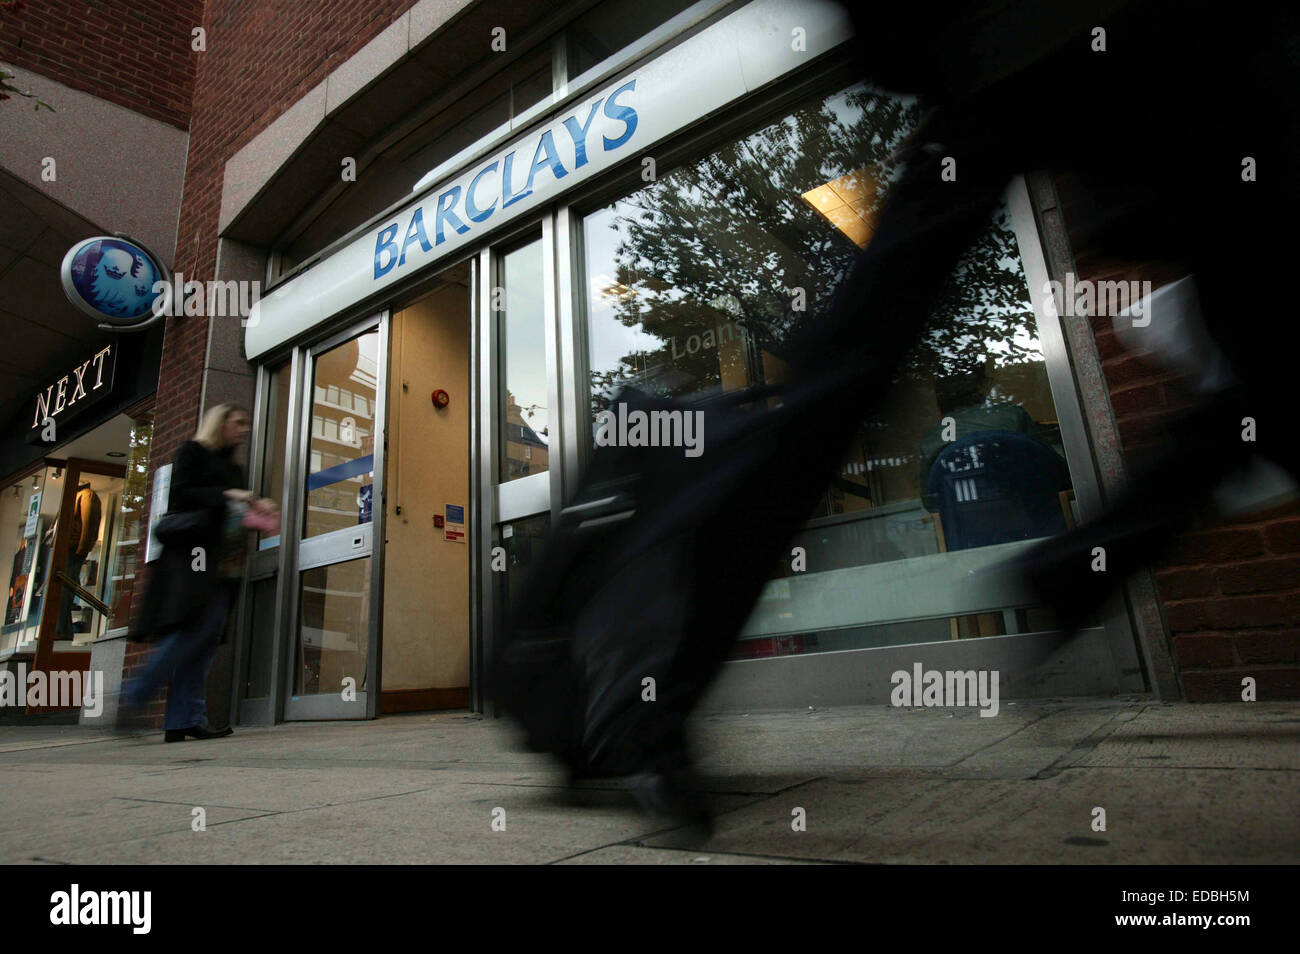 Exterior of the Barclays branch in High Holborn, London. Stock Photo